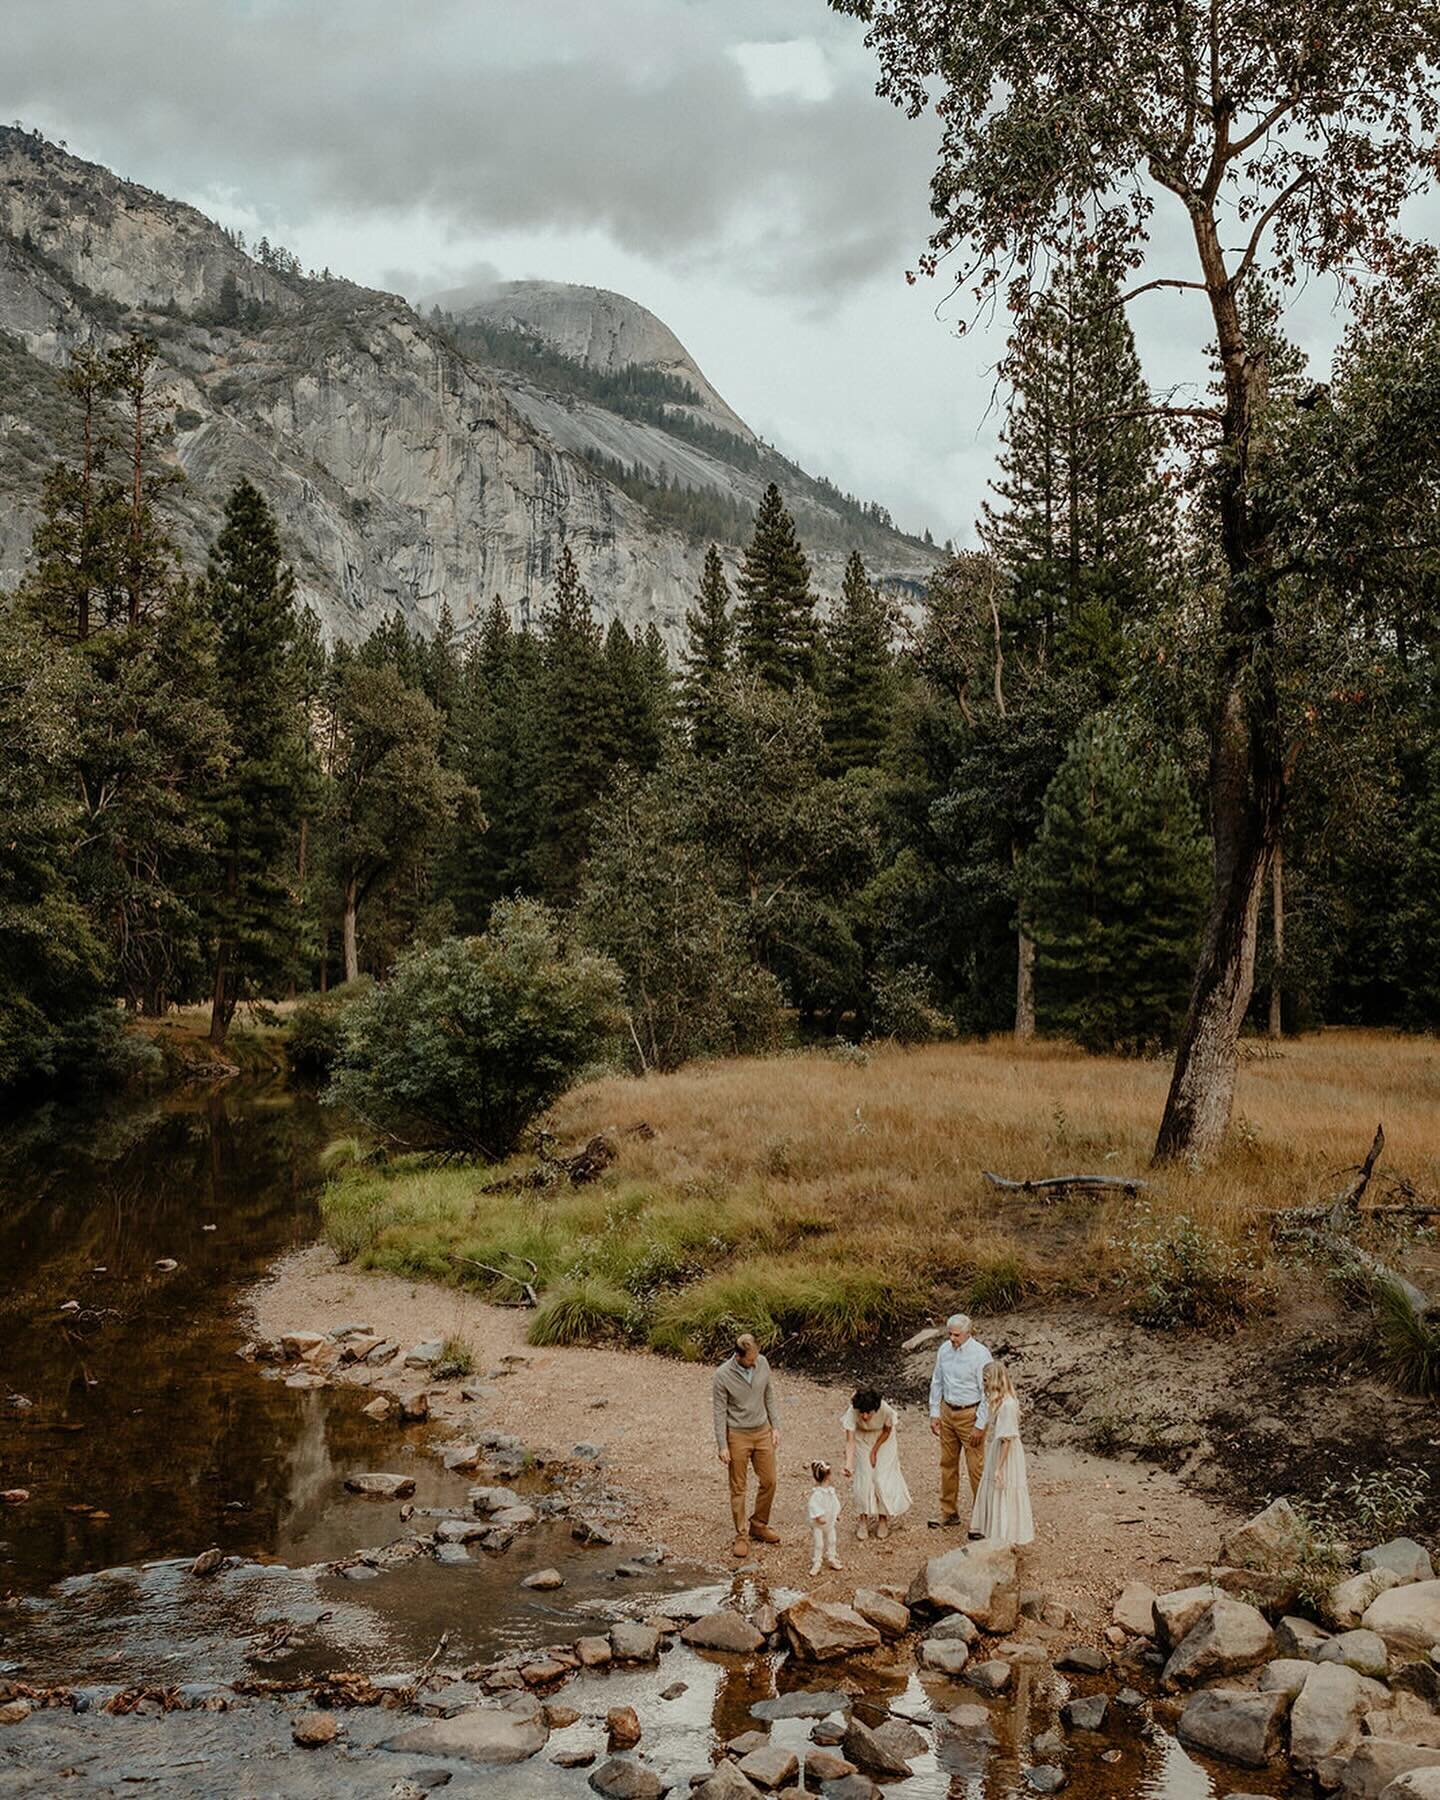 Heading to Yosemite tomorrow for four different projects has me SO excited to be back in my home away from home. Being there brings me such an insane amount of joy that every time the Yosemite season ends for a few months, I immediately start countin